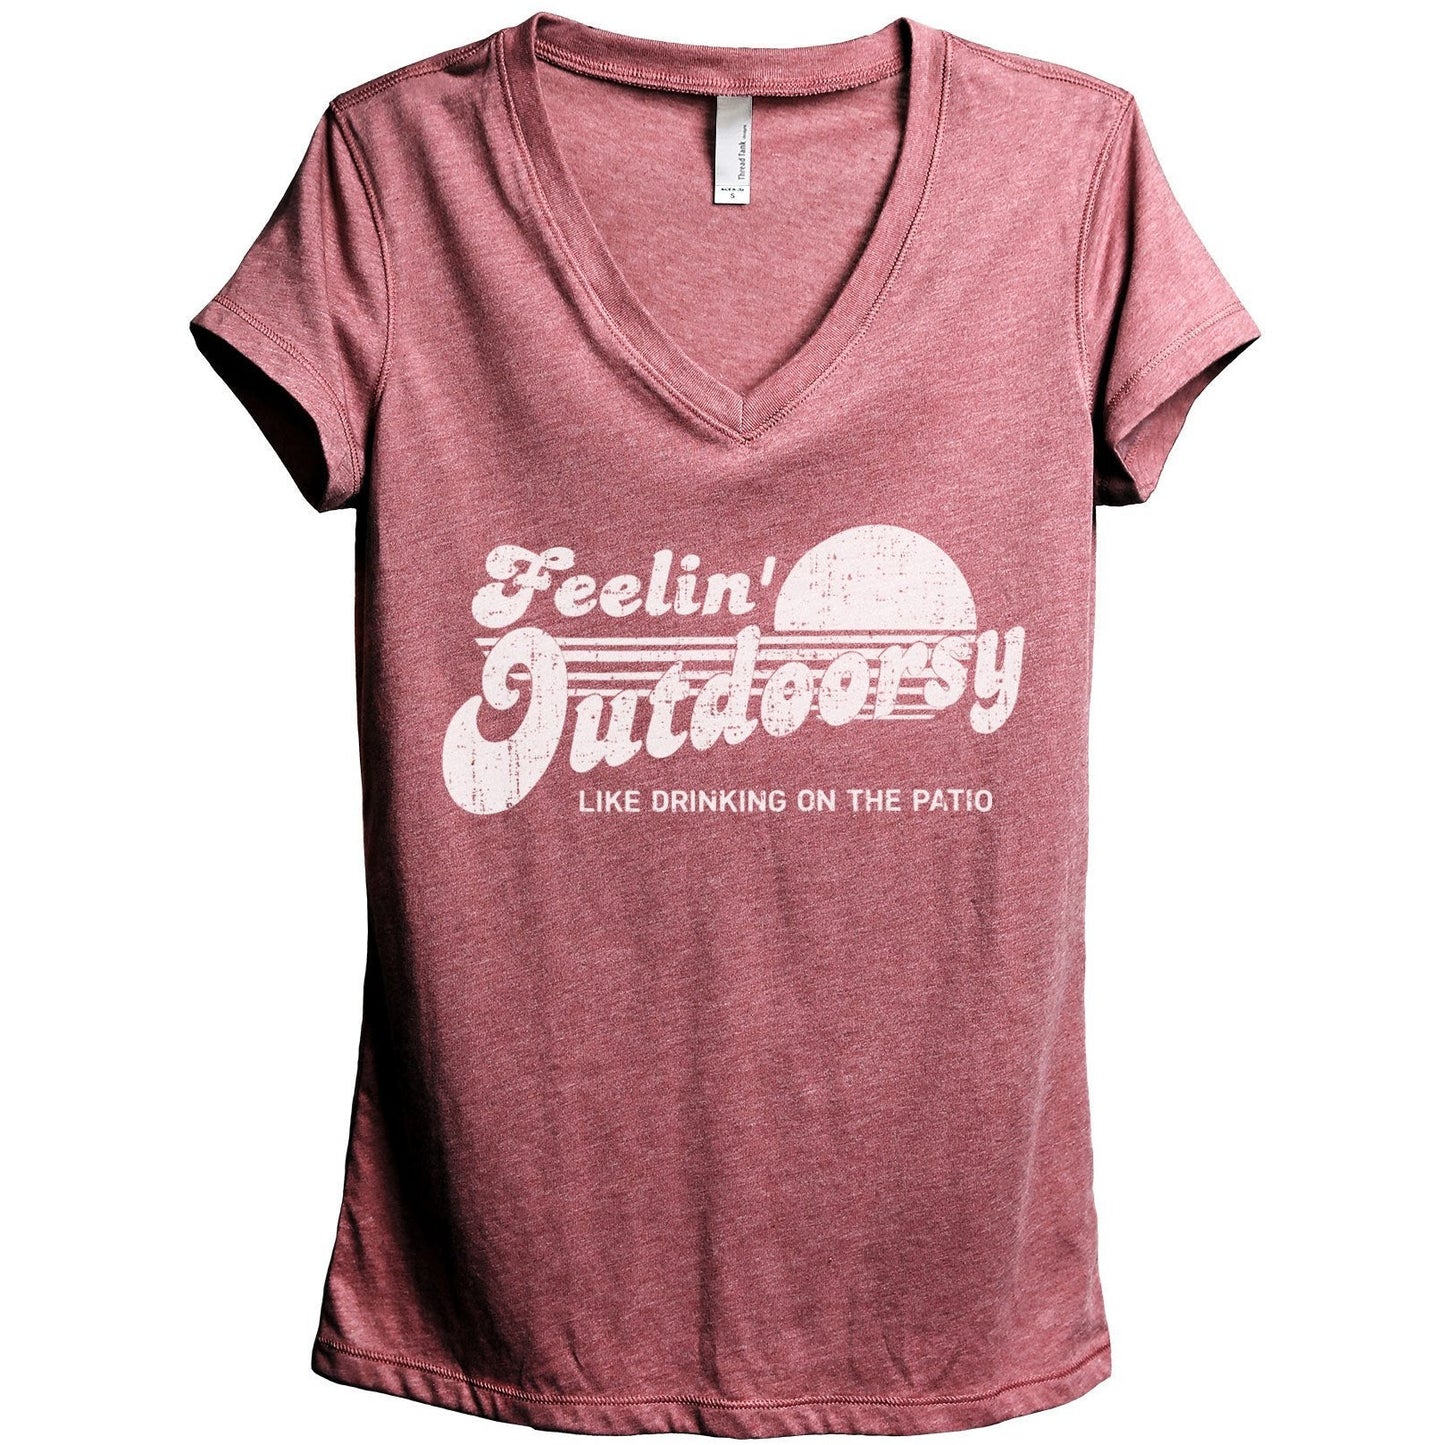 Feelin Outdoorsy Like Drinking On The Patio Women's Relaxed Crewneck T-Shirt Top Tee Heather Rouge
